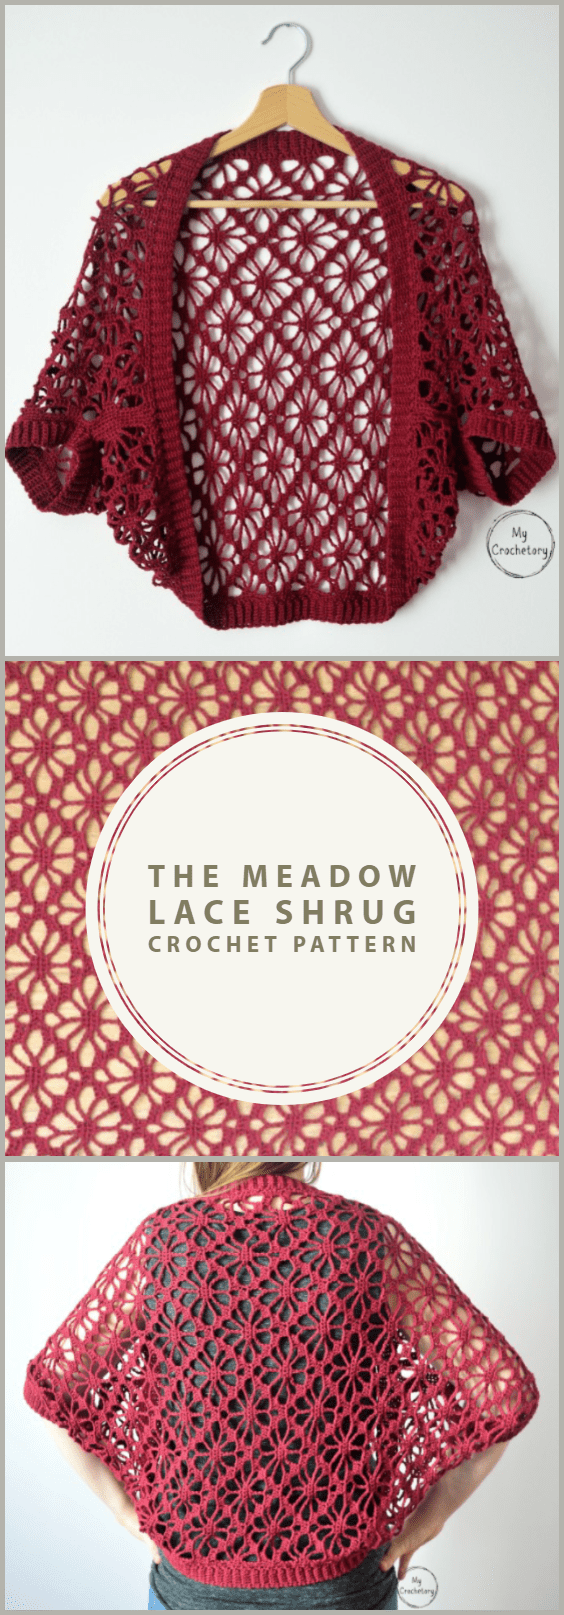 Meadow-Lace-Shrug-Crochet.png